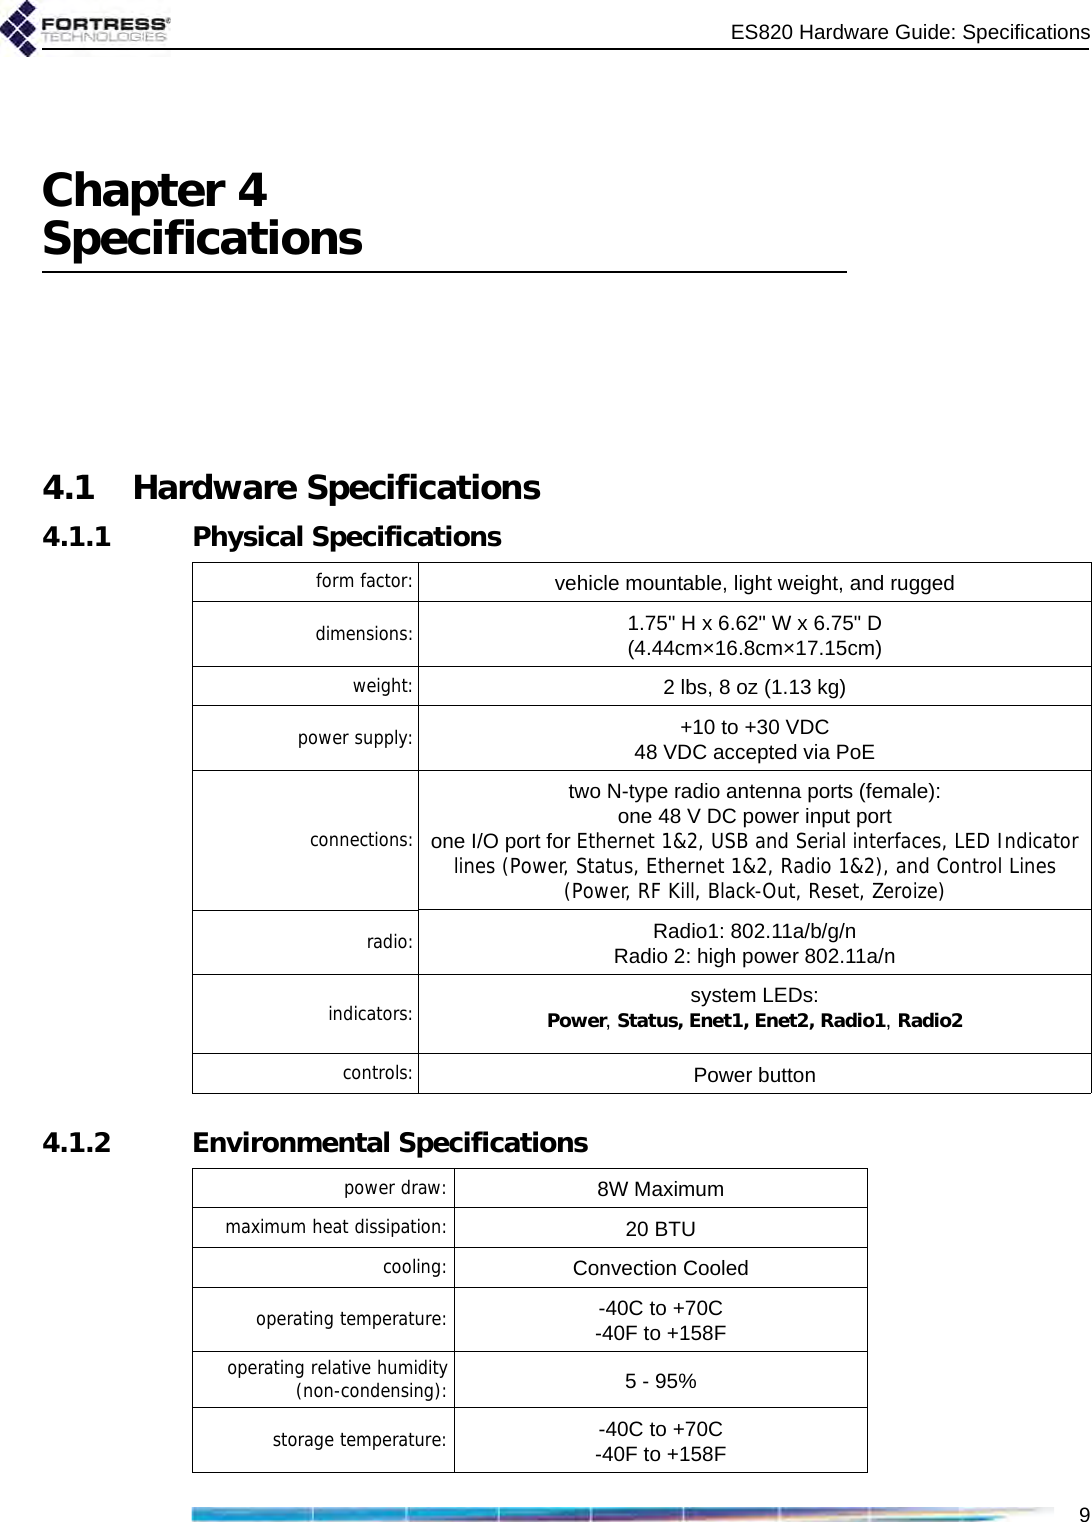 ES820 Hardware Guide: Specifications9Chapter 4Specifications4.1 Hardware Specifications4.1.1 Physical Specifications4.1.2 Environmental Specificationsform factor: vehicle mountable, light weight, and ruggeddimensions: 1.75&quot; H x 6.62&quot; W x 6.75&quot; D(4.44cm×16.8cm×17.15cm)weight: 2 lbs, 8 oz (1.13 kg)power supply: +10 to +30 VDC48 VDC accepted via PoEconnections:two N-type radio antenna ports (female):one 48 V DC power input portone I/O port for Ethernet 1&amp;2, USB and Serial interfaces, LED Indicator lines (Power, Status, Ethernet 1&amp;2, Radio 1&amp;2), and Control Lines (Power, RF Kill, Black-Out, Reset, Zeroize)radio: Radio1: 802.11a/b/g/nRadio 2: high power 802.11a/nindicators: system LEDs:Power, Status, Enet1, Enet2, Radio1, Radio2controls: Power buttonpower draw: 8W Maximummaximum heat dissipation: 20 BTUcooling: Convection Cooledoperating temperature: -40C to +70C-40F to +158Foperating relative humidity(non-condensing): 5 - 95%storage temperature: -40C to +70C-40F to +158F